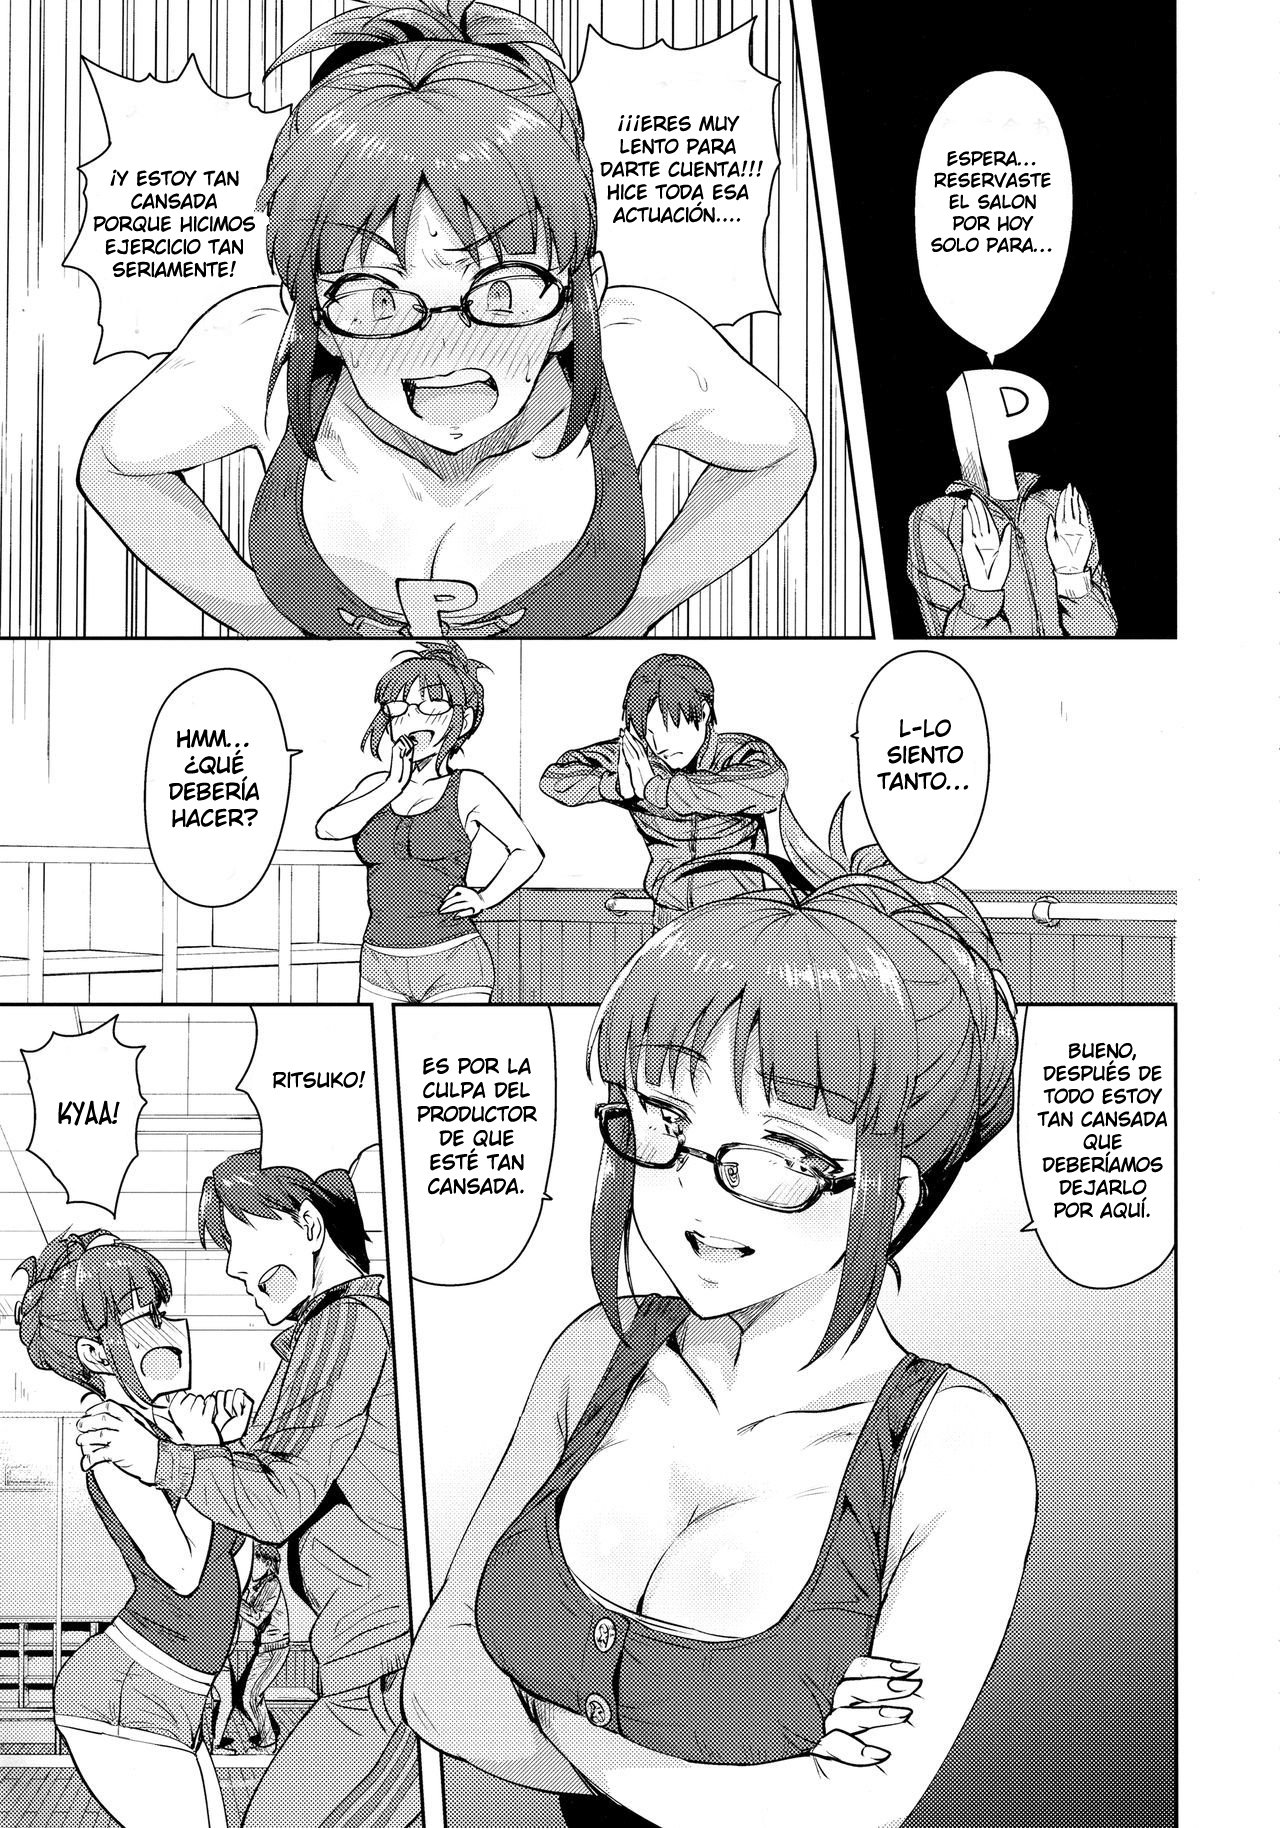 Stretching with Ritsuko - 3